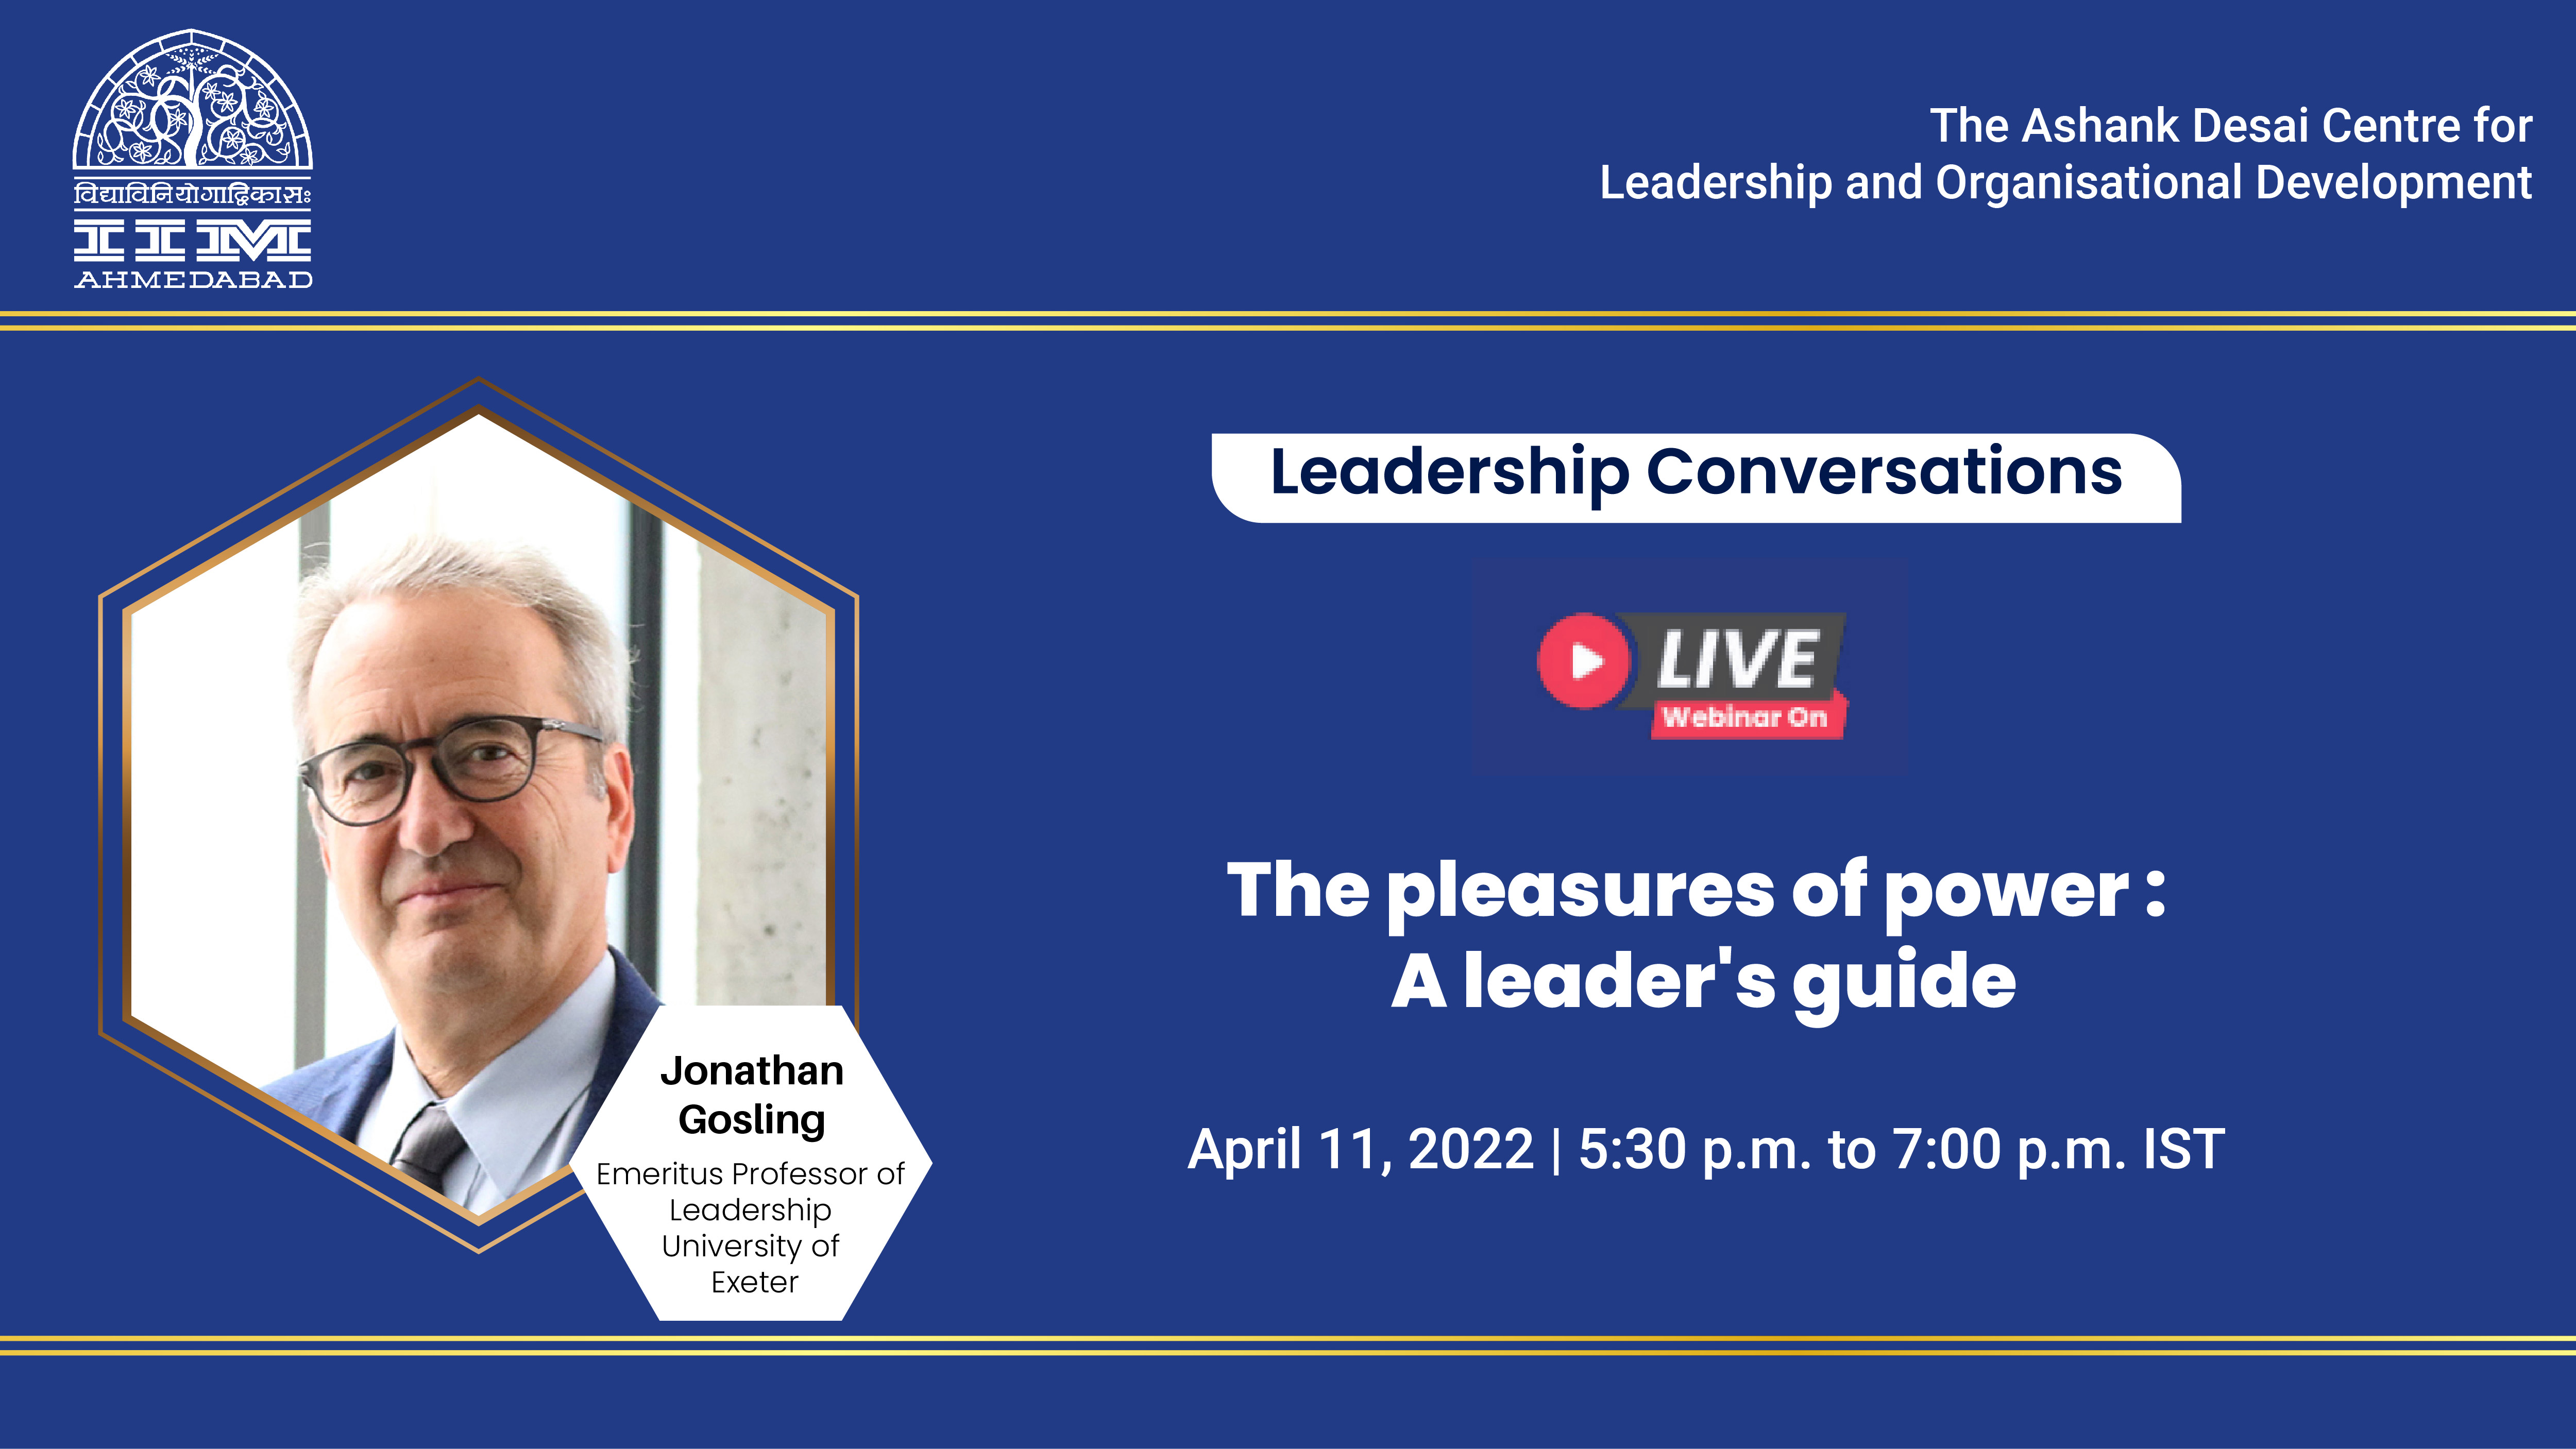 The Leadership Conversations on “The pleasures of power: a leader's guide”